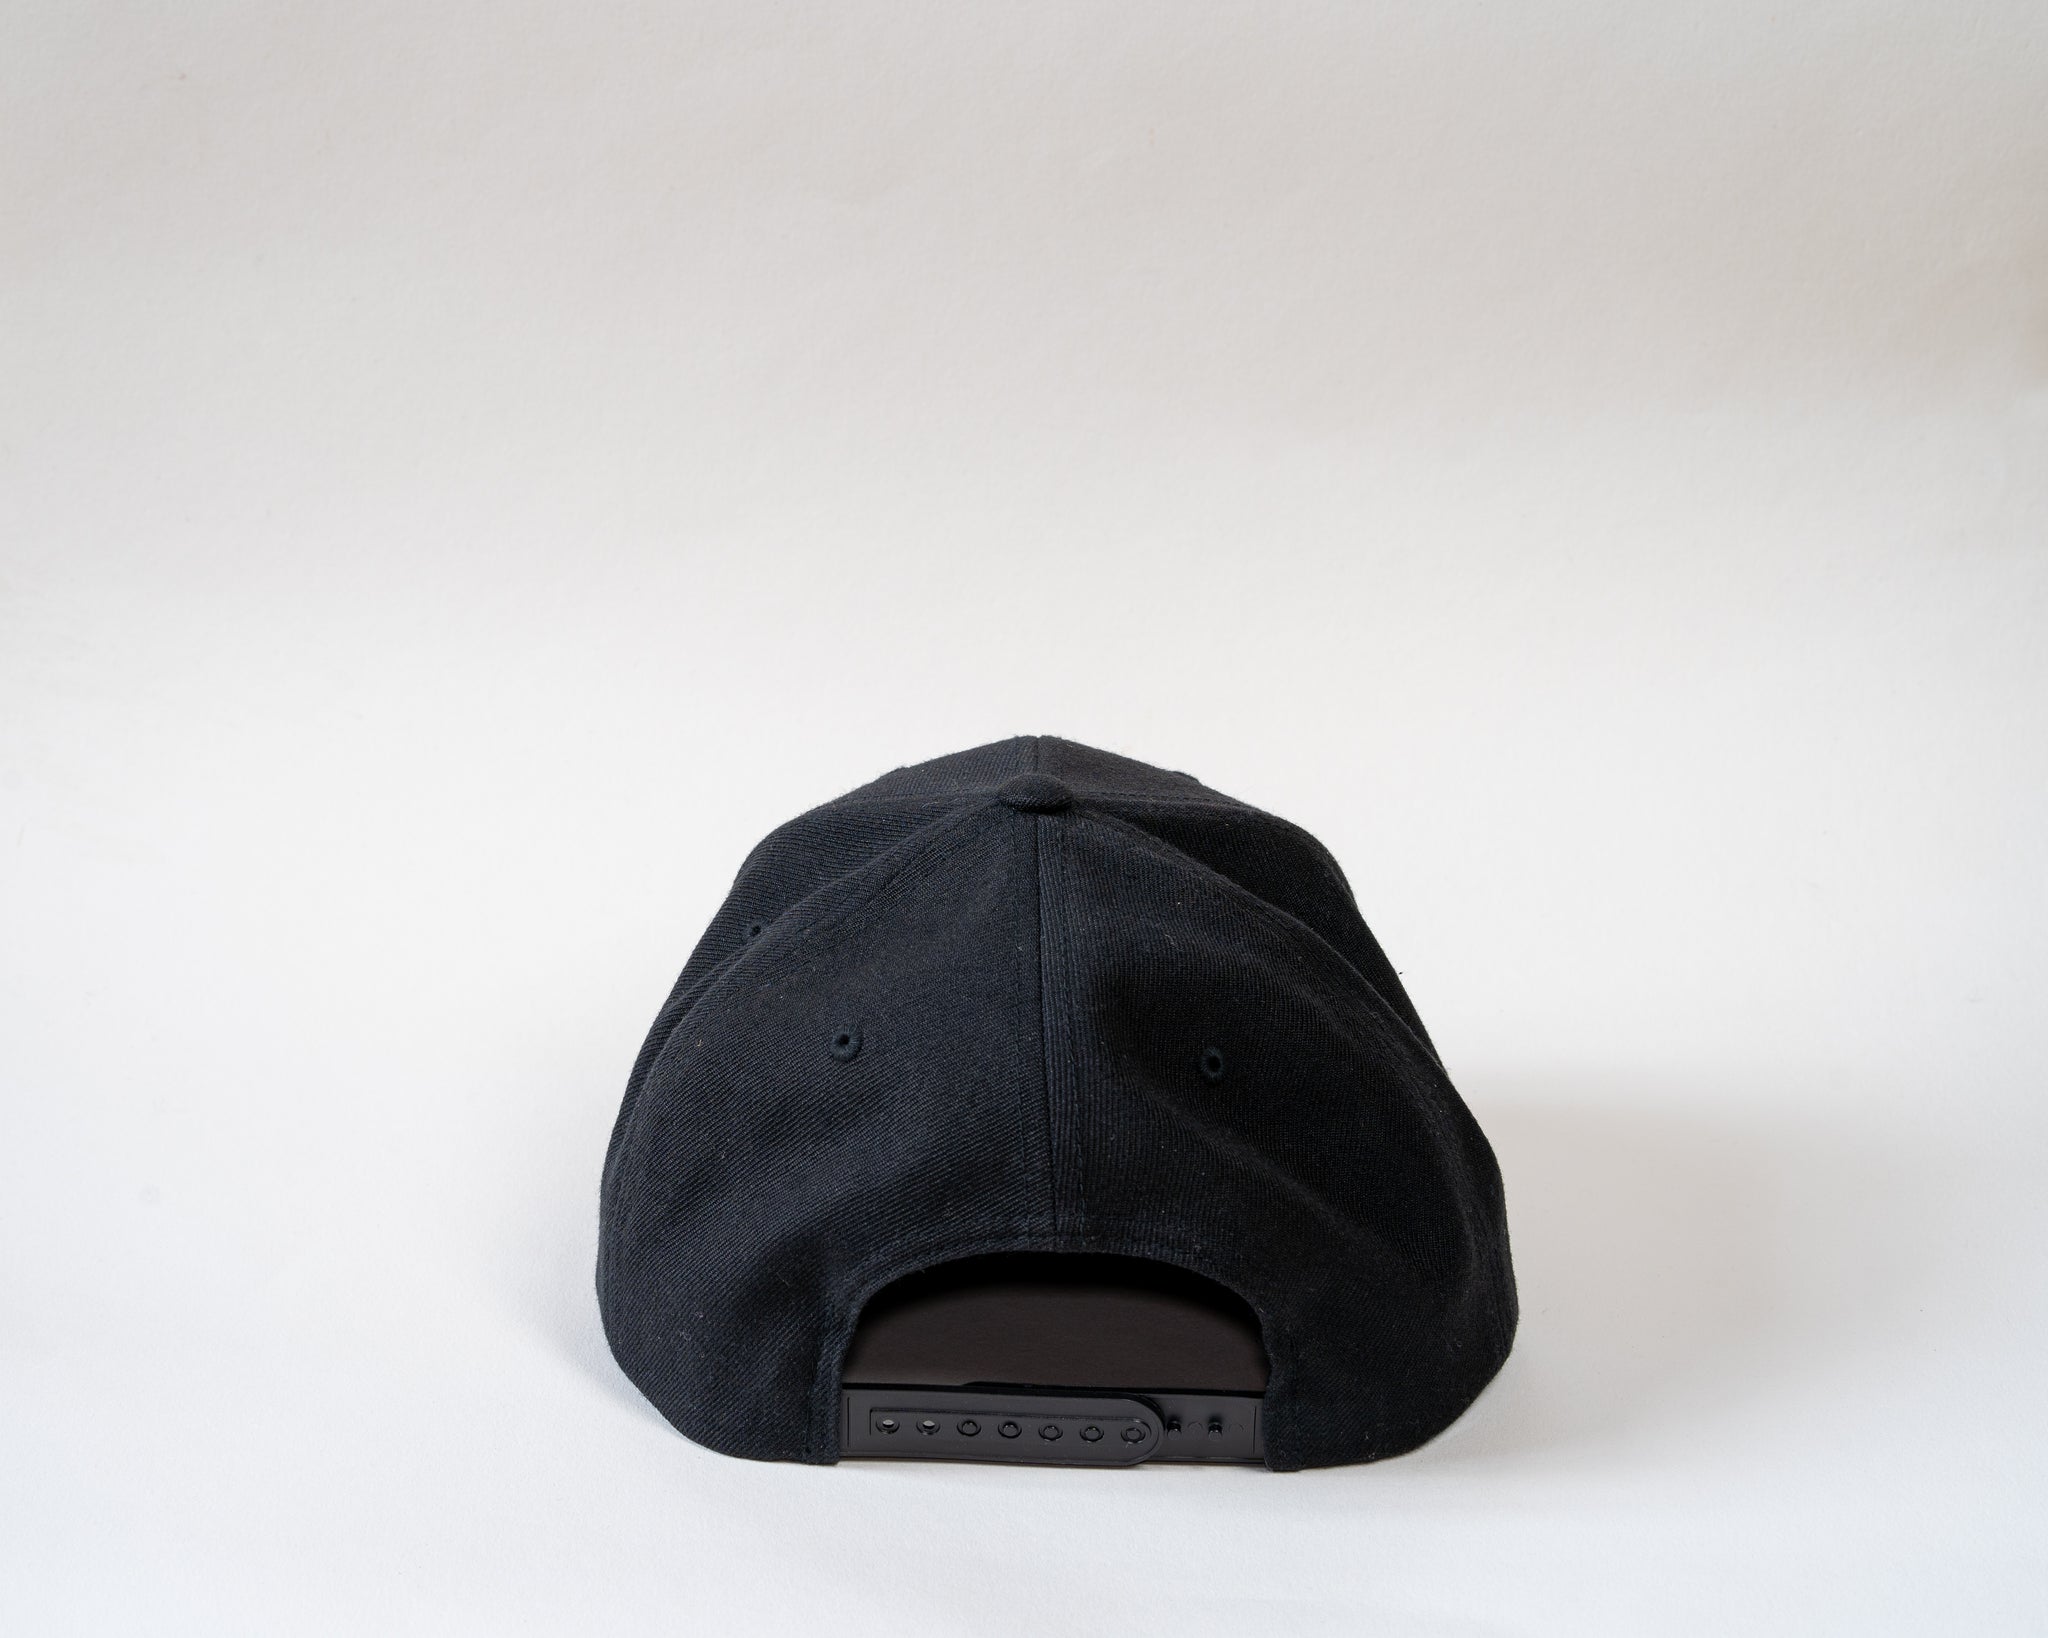 JAM snap back cap featuring rear clasp on a white background